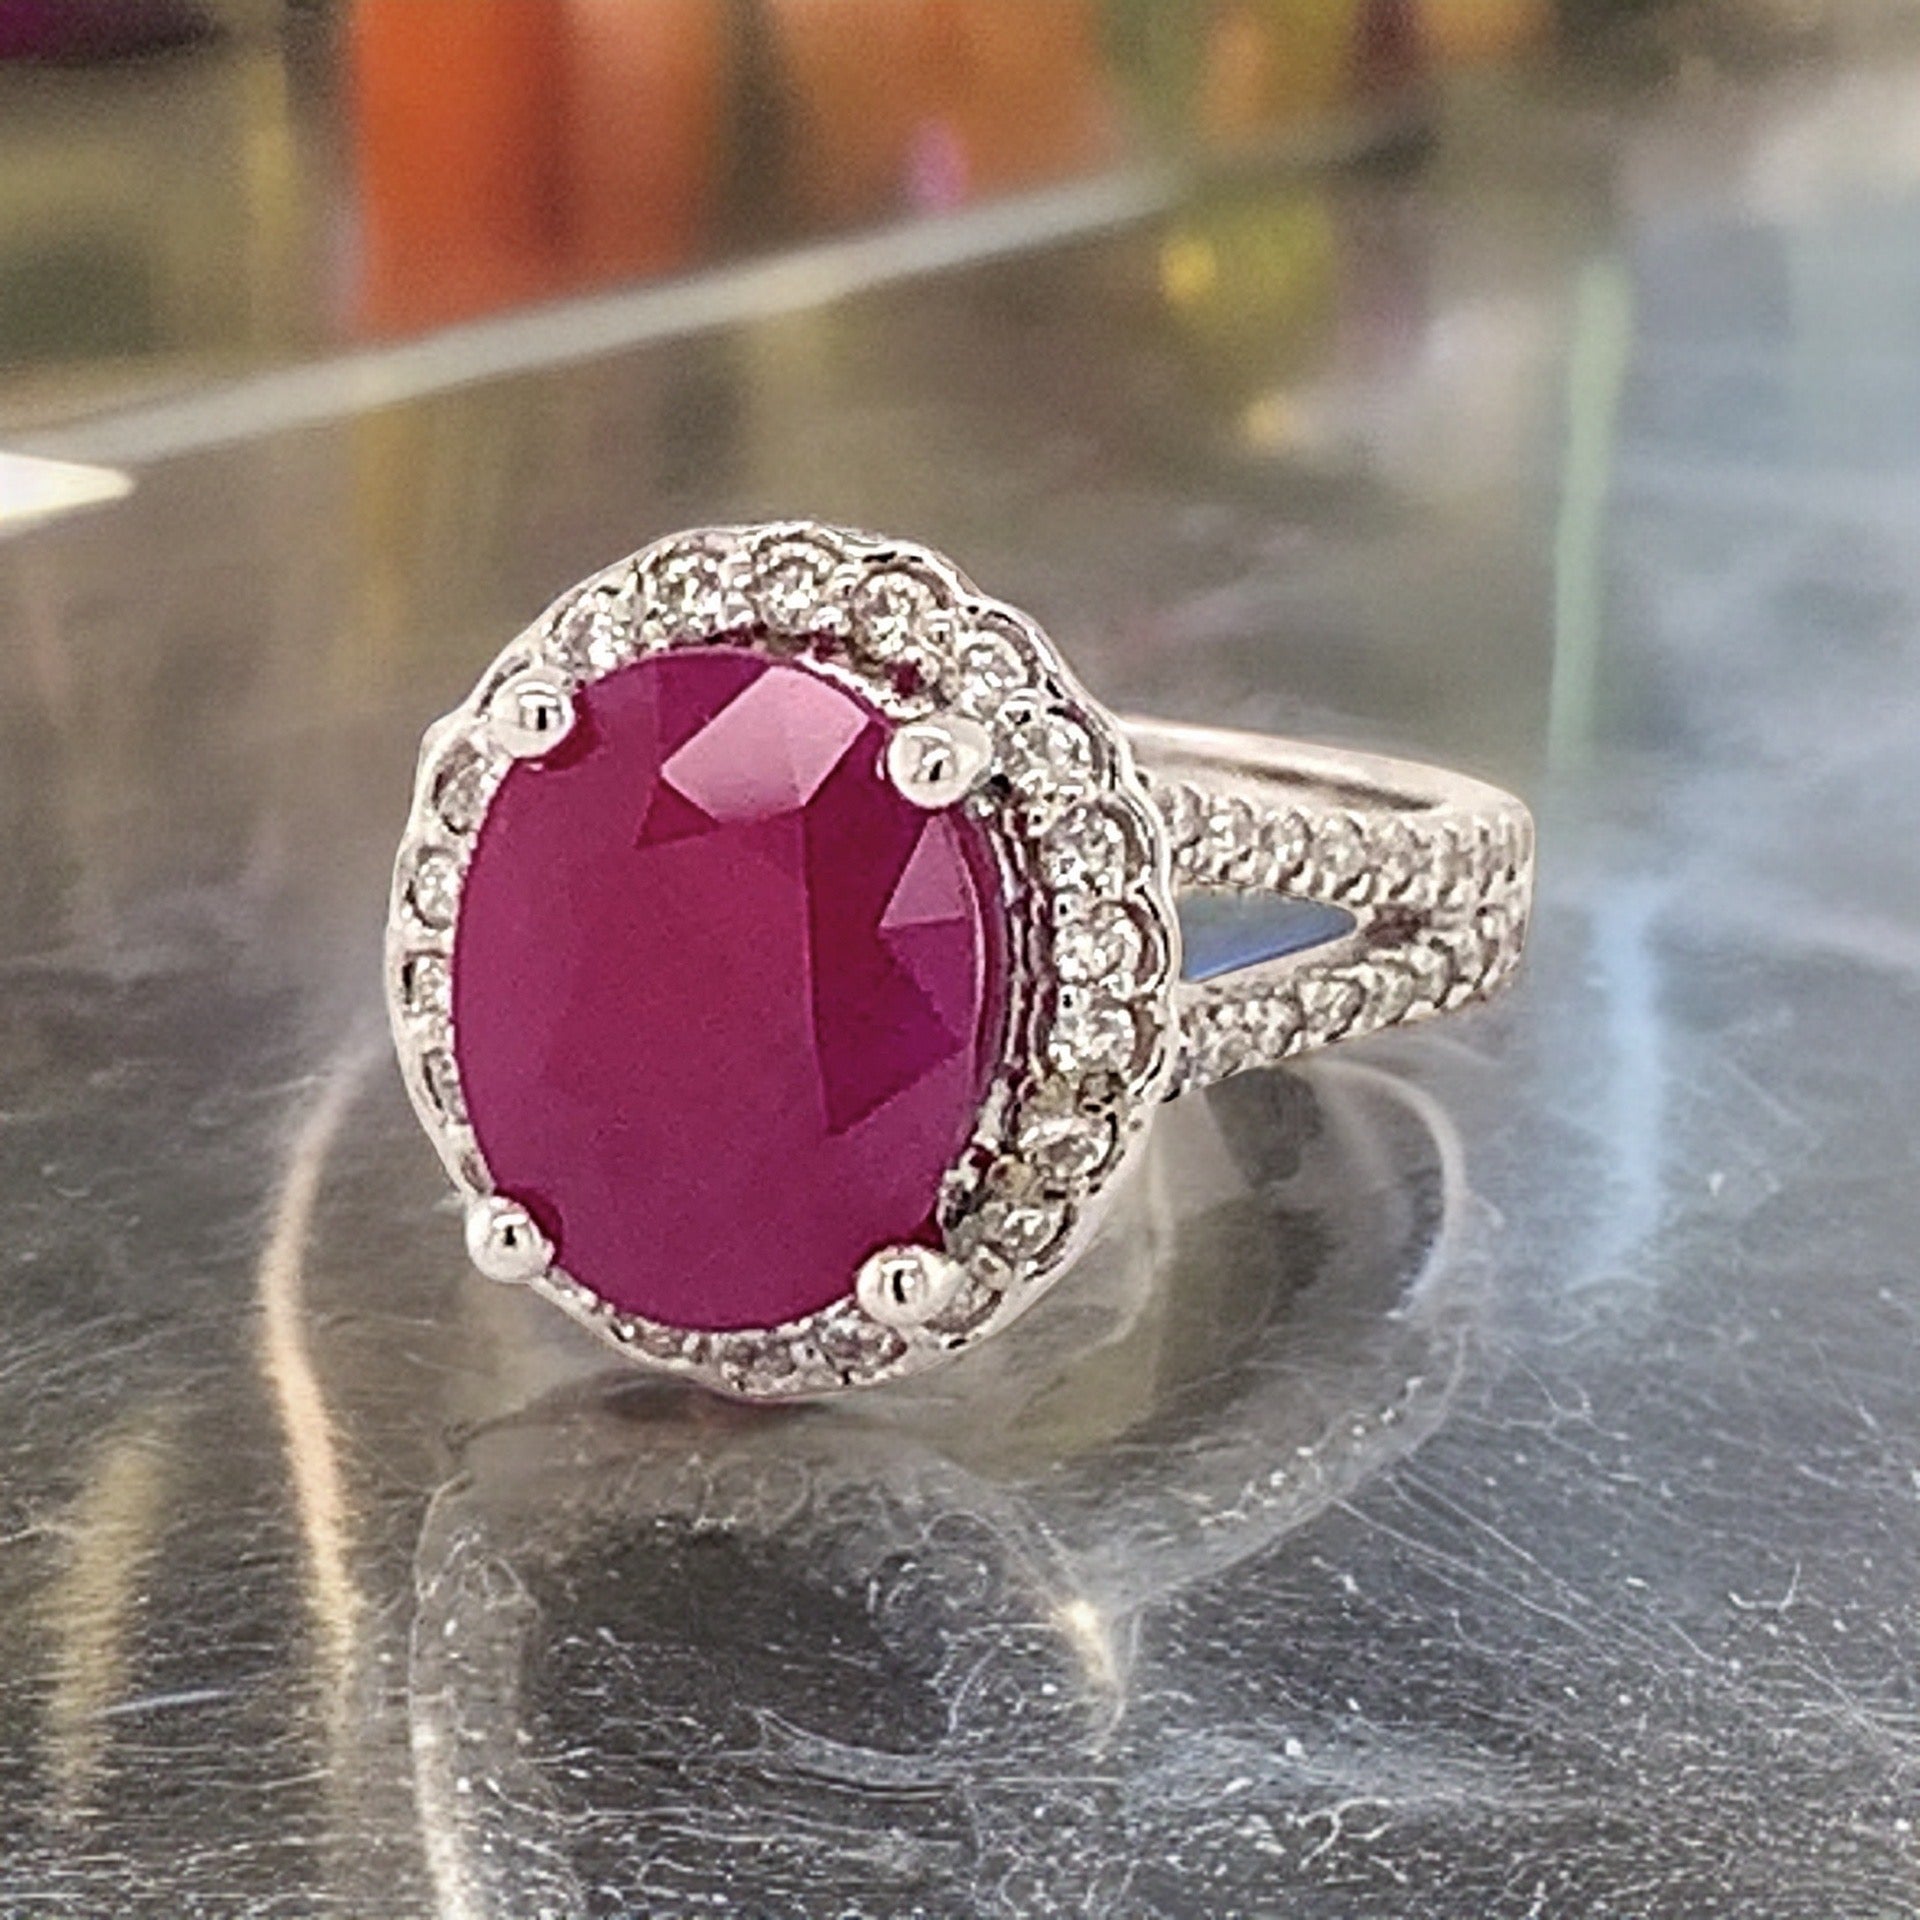 Natural Ruby Diamond Ring 14k Gold 6.5 TCW Size 5.75 GIA Certified $6,950 111871 - Certified Fine Jewelry